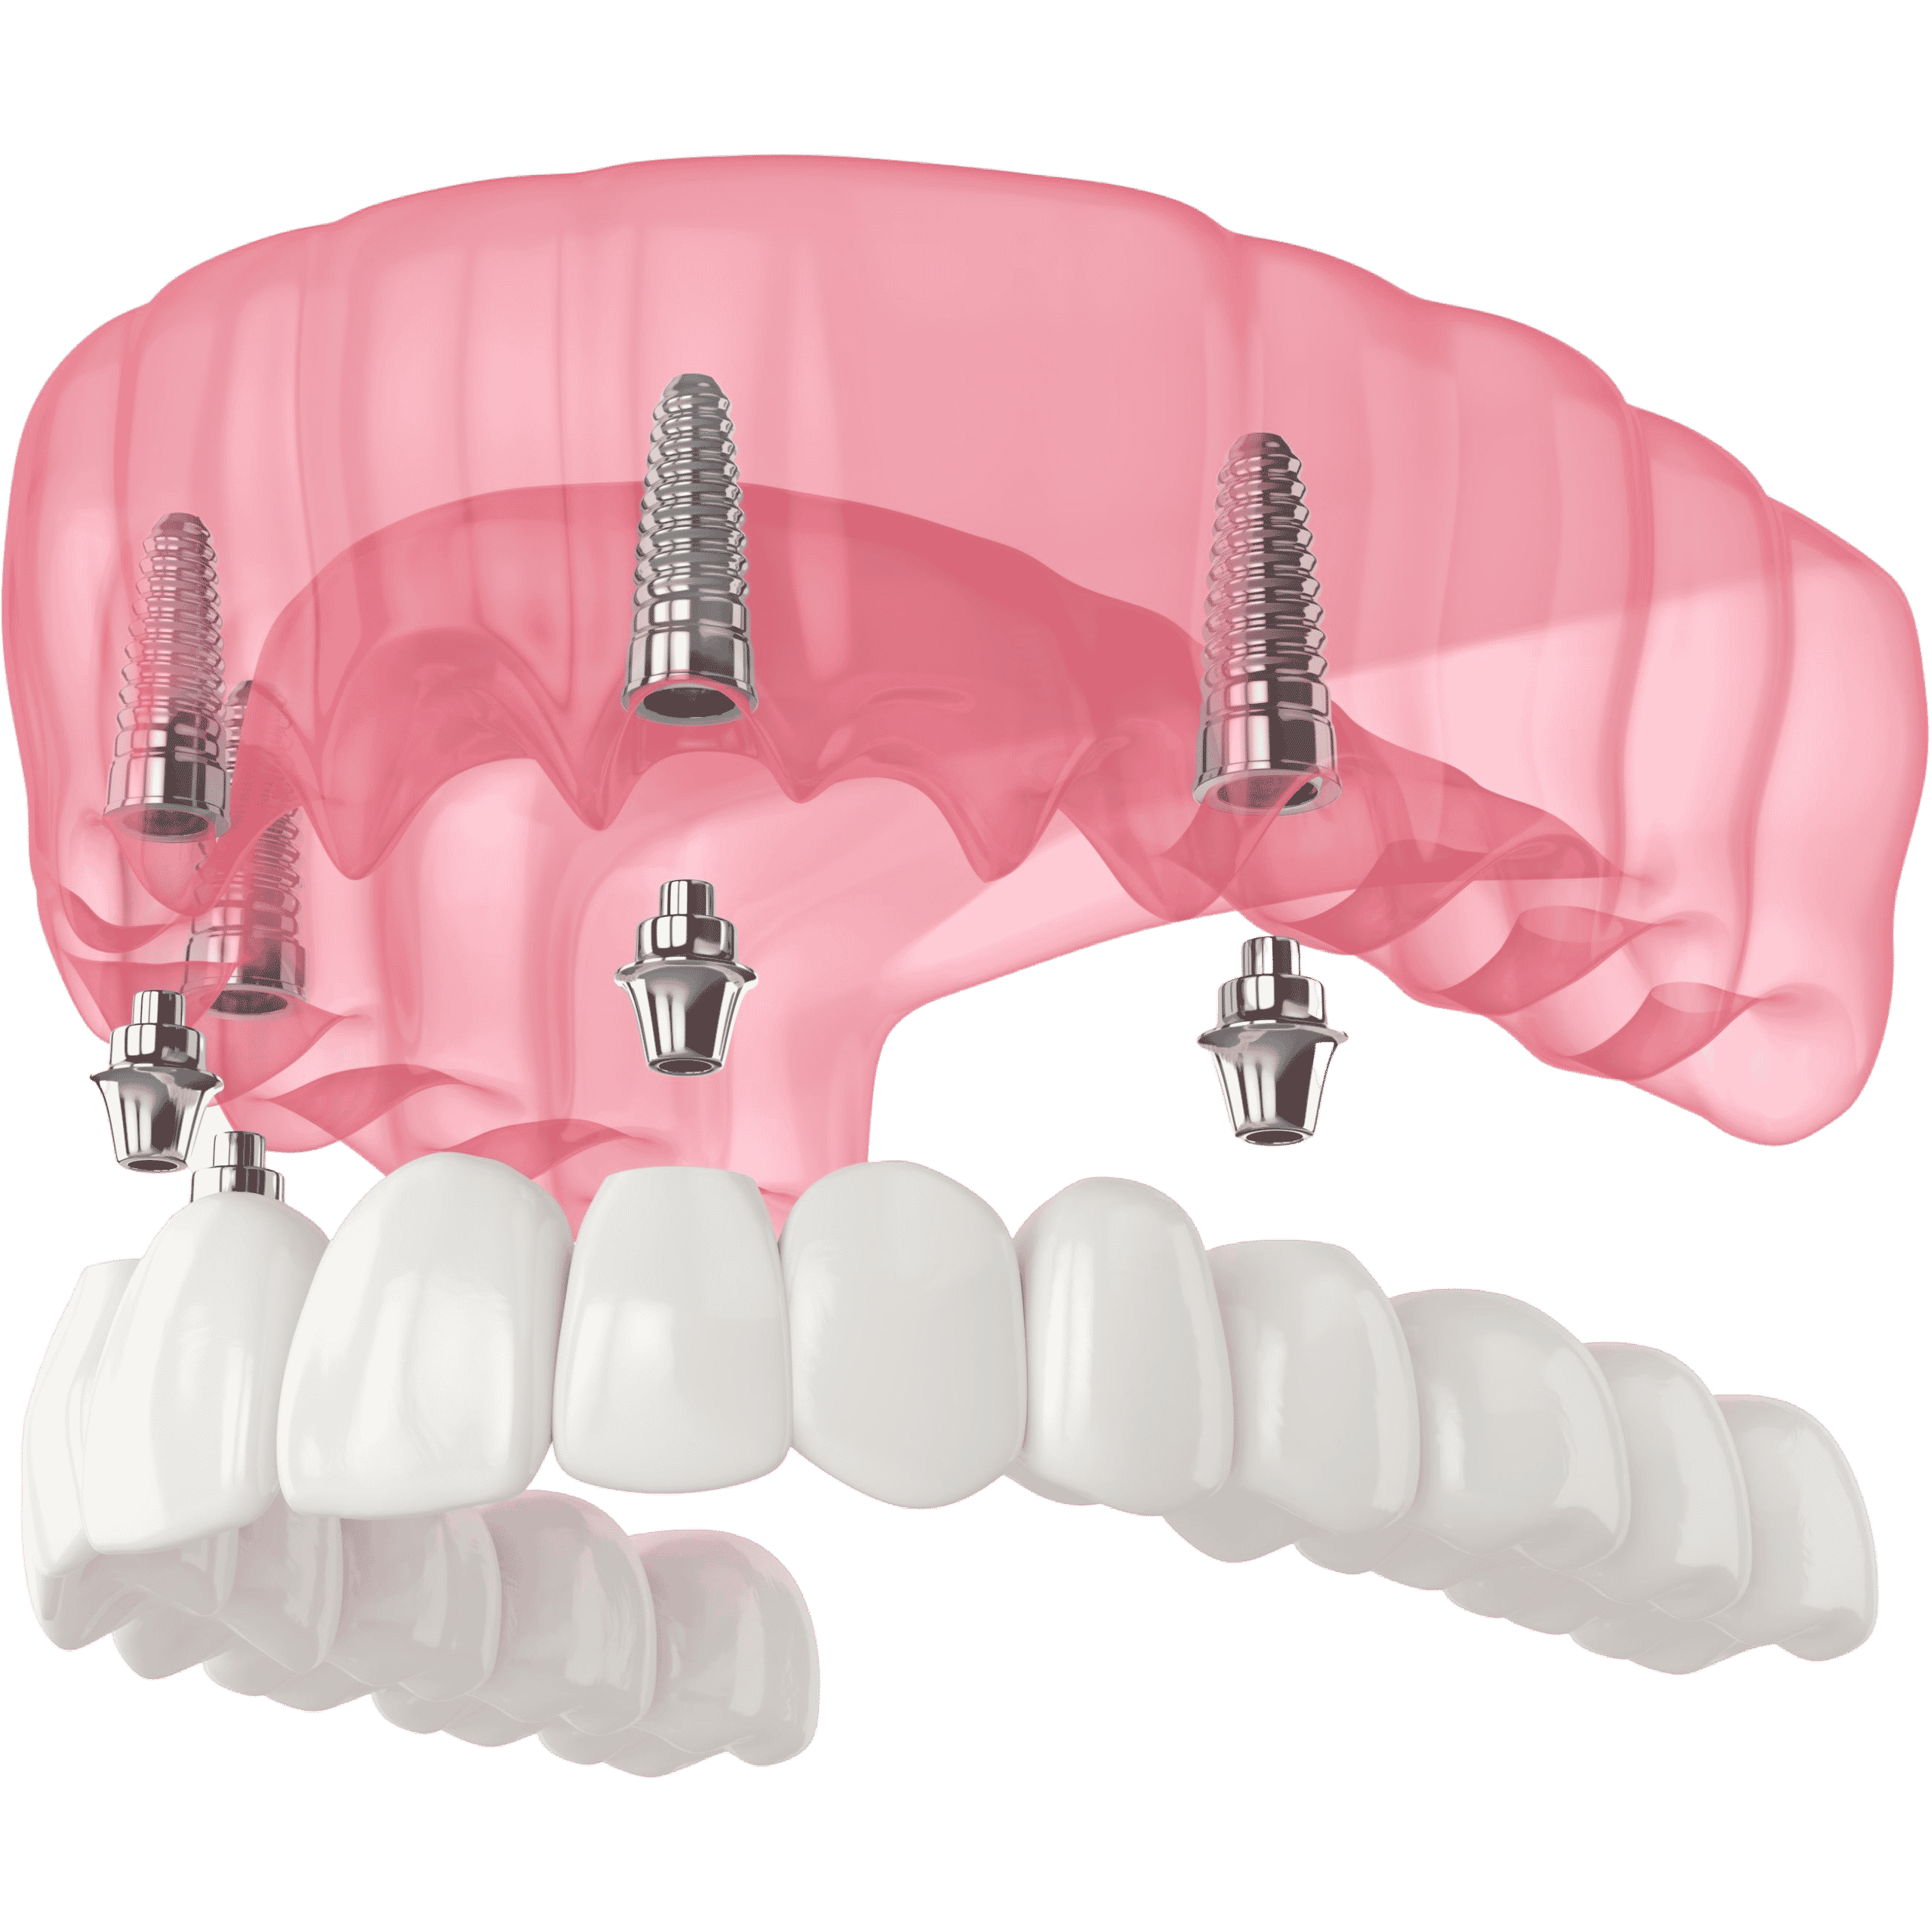 Restore an entire arch of missing teeth with our full-arch dental implants. This treatment is ideal for patients who are missing all of their teeth on the top or bottom arch. In one surgery, we can place a full arch of implants, so you enjoy life-changing results in one day.